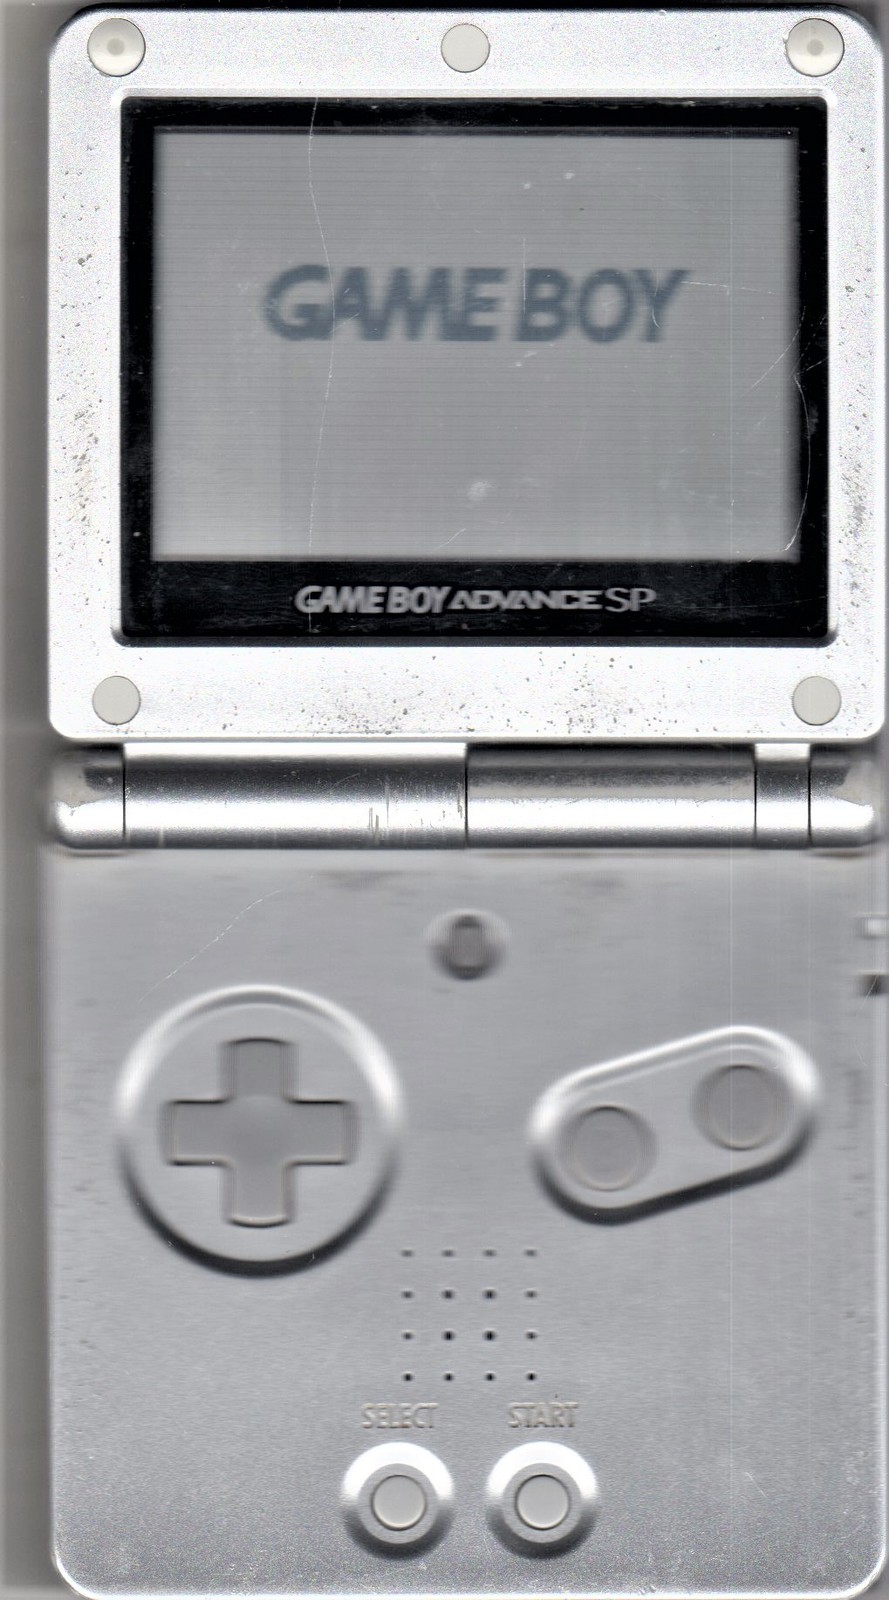 Primary image for Nintendo GameBoy Advance SP console